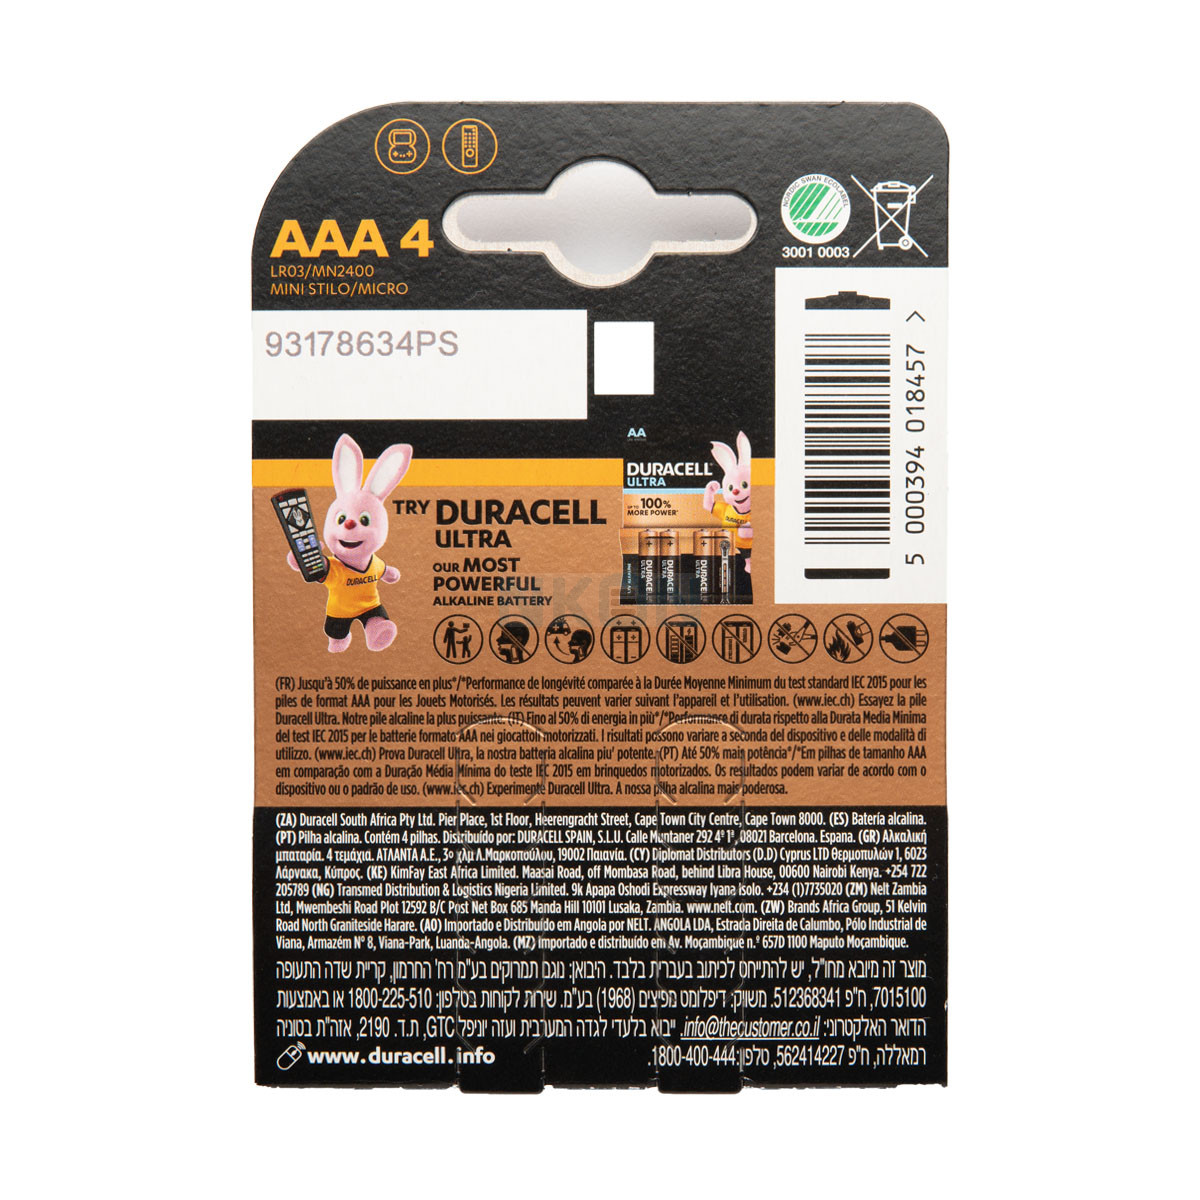 DURACELL PILA ALCALINA CHICA AAA 1.5 V. 1 unid. – Offimania